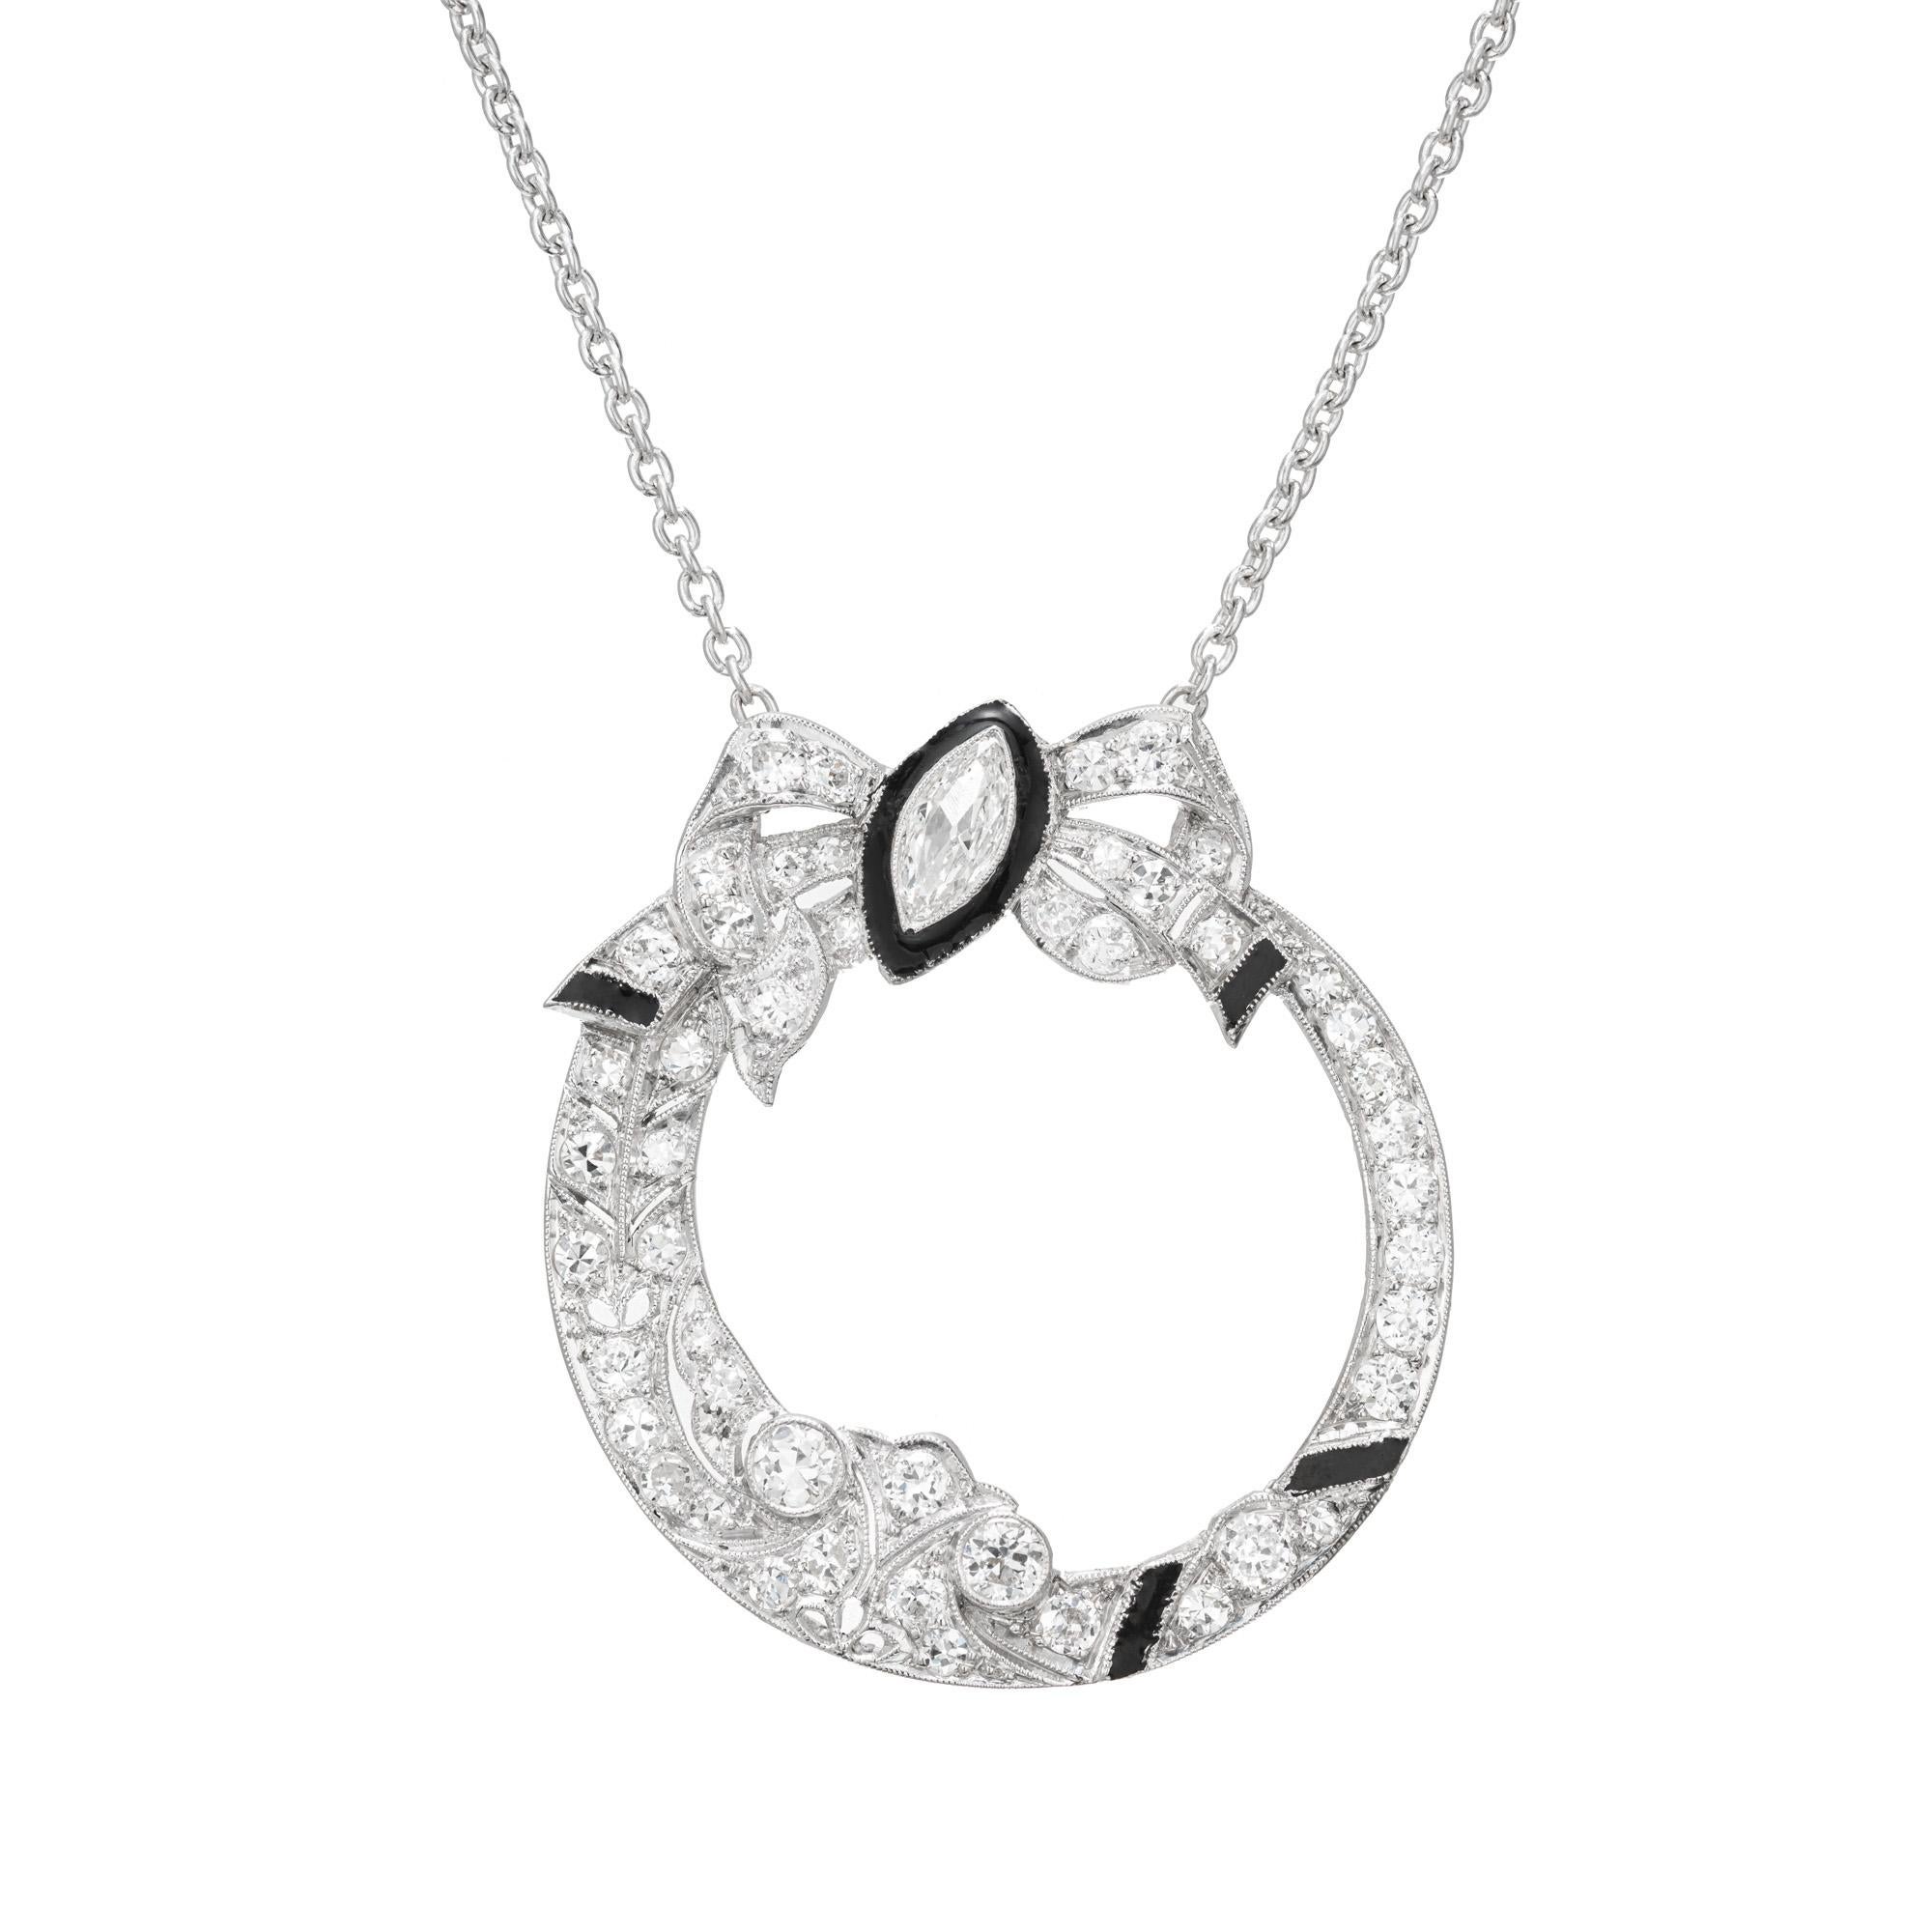 Bow style Diamond and enamel platinum and white gold pendant necklace. 1 Marquise diamond with a black enamel halo with 48 old European cut accent diamonds.  Platinum solid top with a 14k white gold back. Platinum 16 inch chain and spring ring.